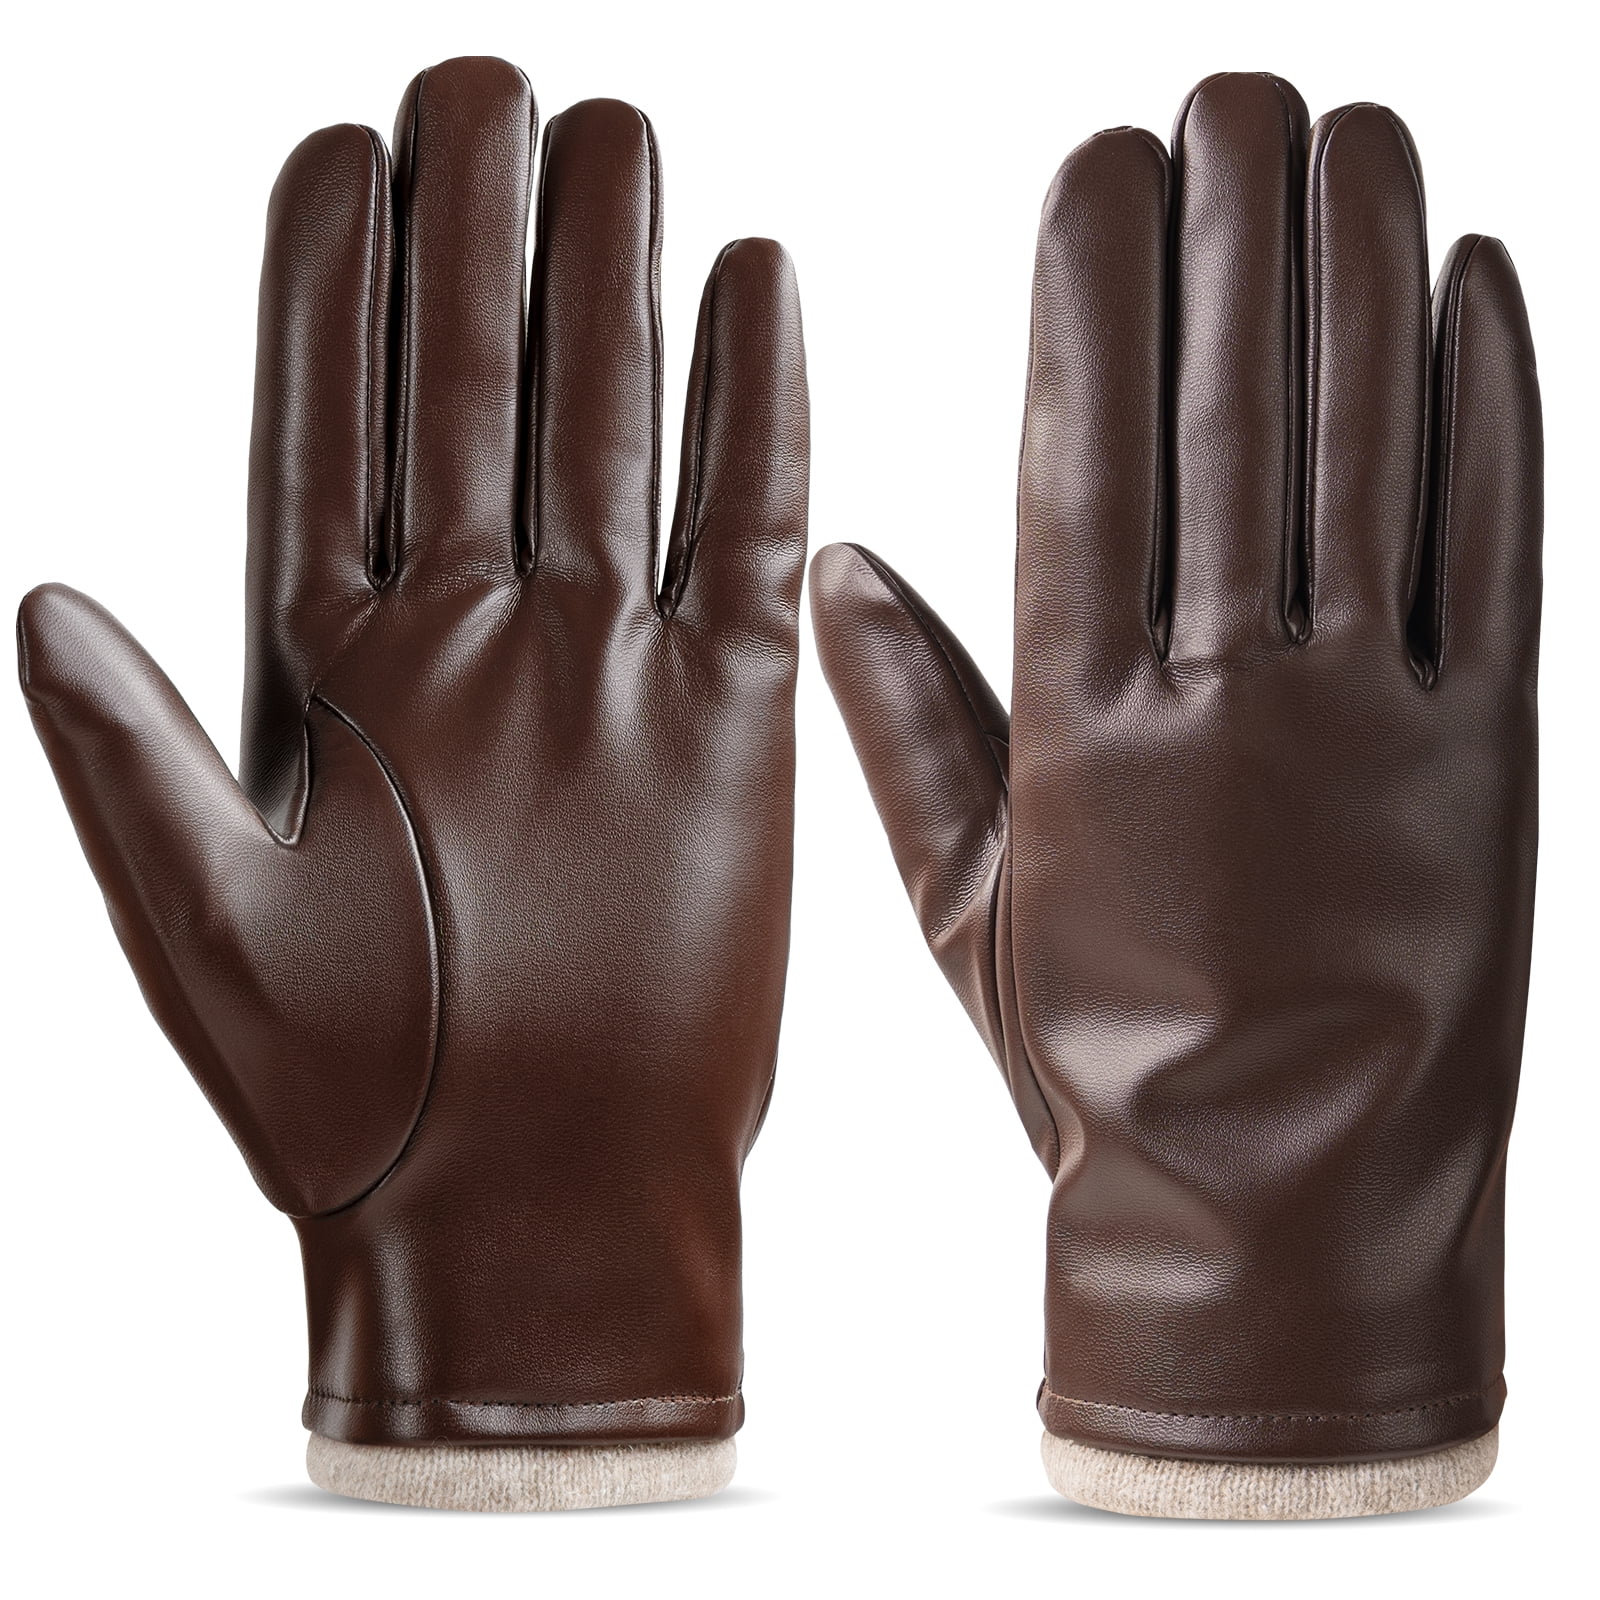 OZERO Mens Winter Gloves PU Leather Thermal Warm Snow Touchscreen Glove Brown